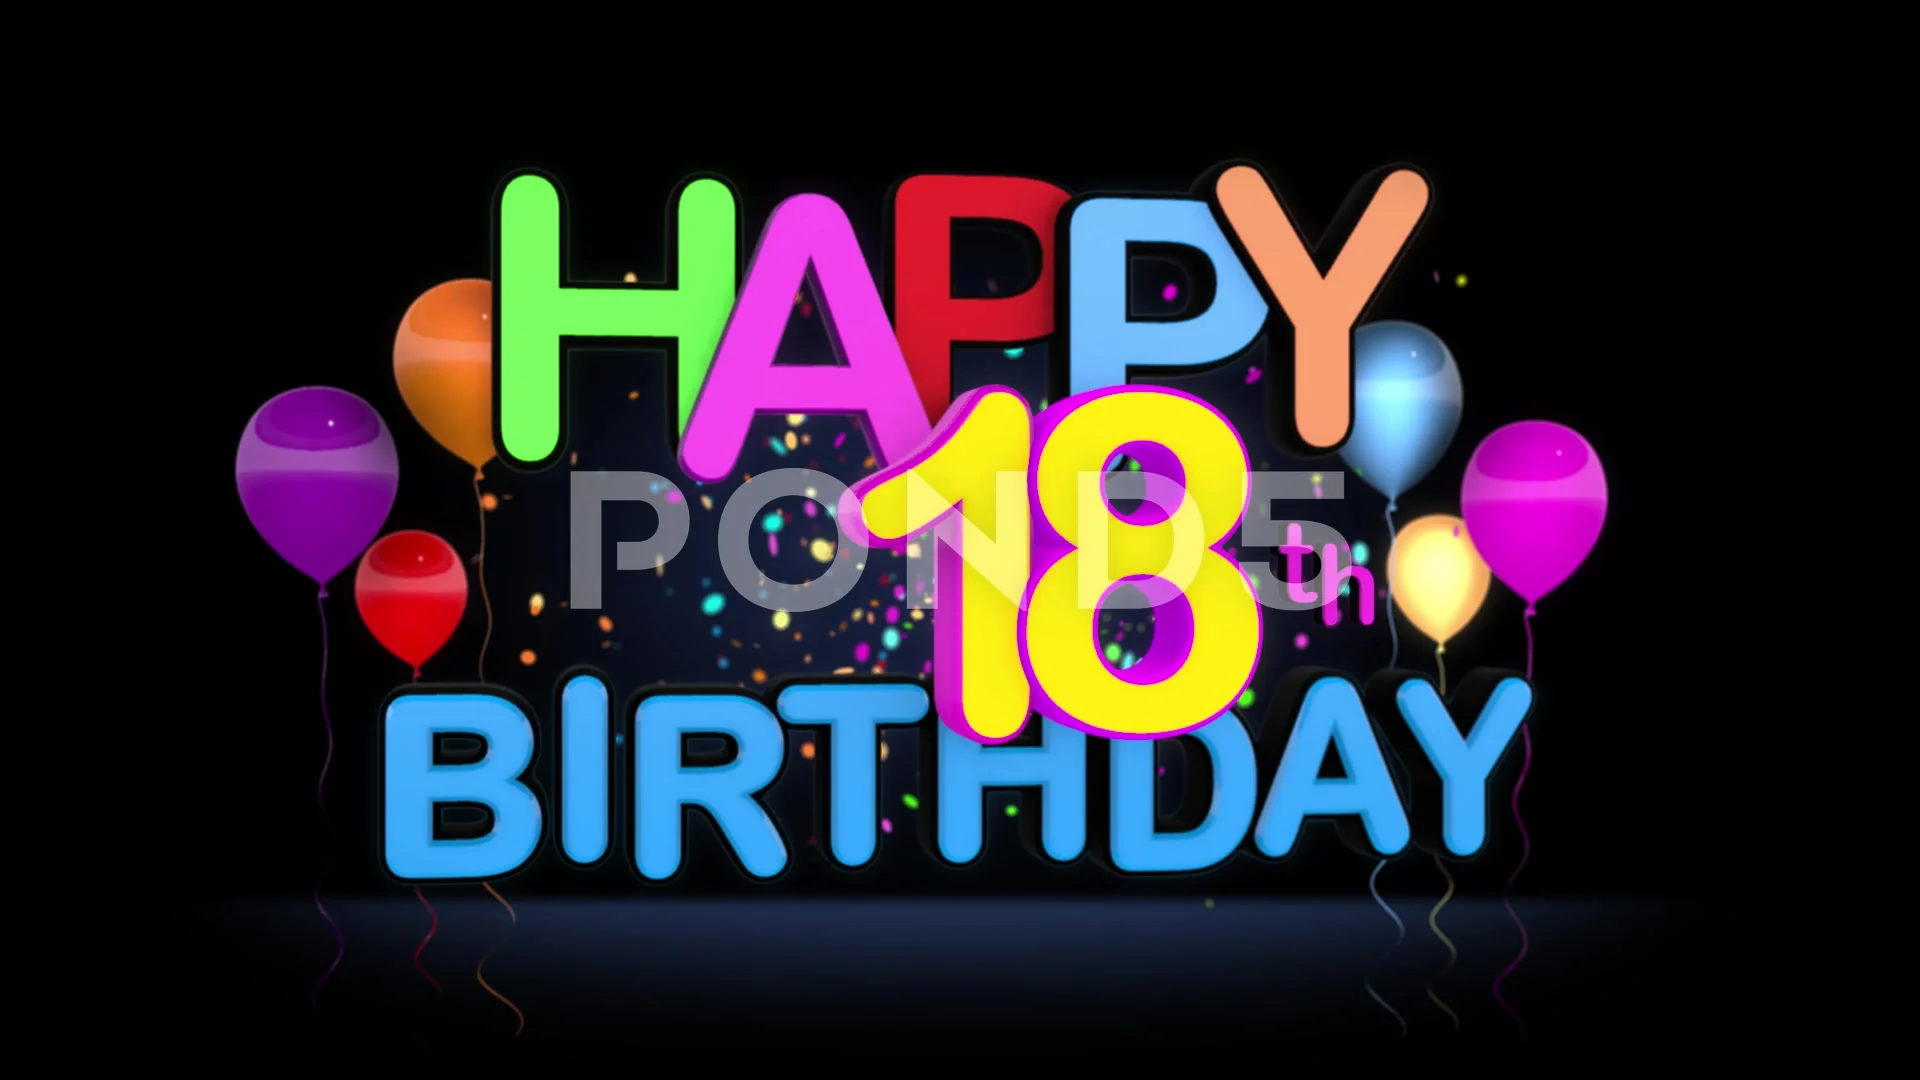 global warming animated clipart birthday